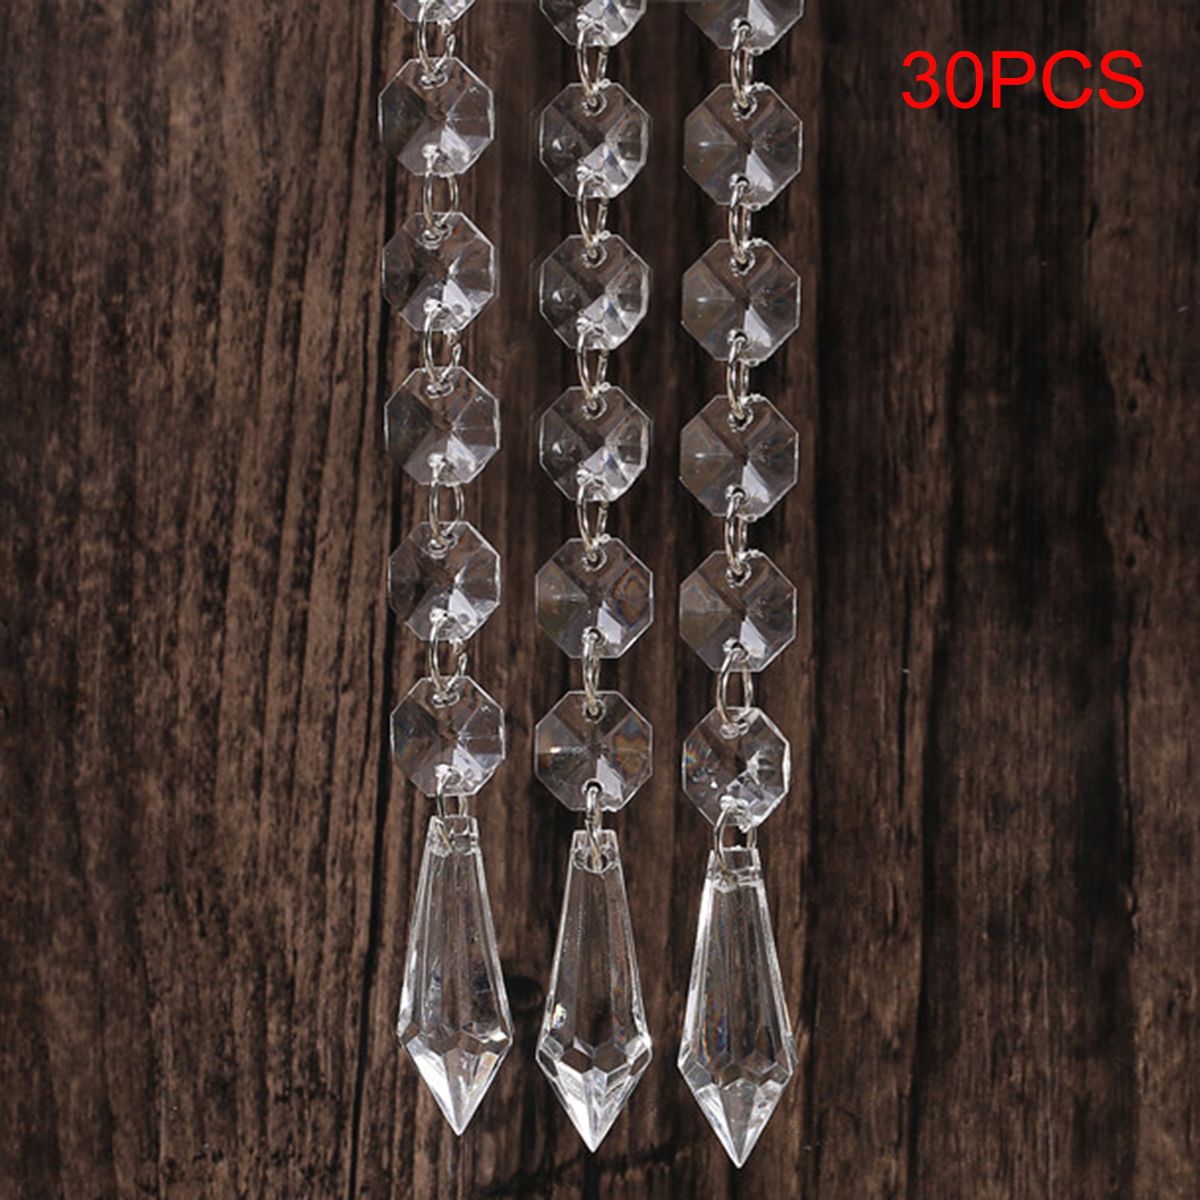 30PCS-Acrylic-Crystal-Beads-Chain-Chandelier-Pendant-Light-Garland-Hanging-Wedding-Home-Party-1374553